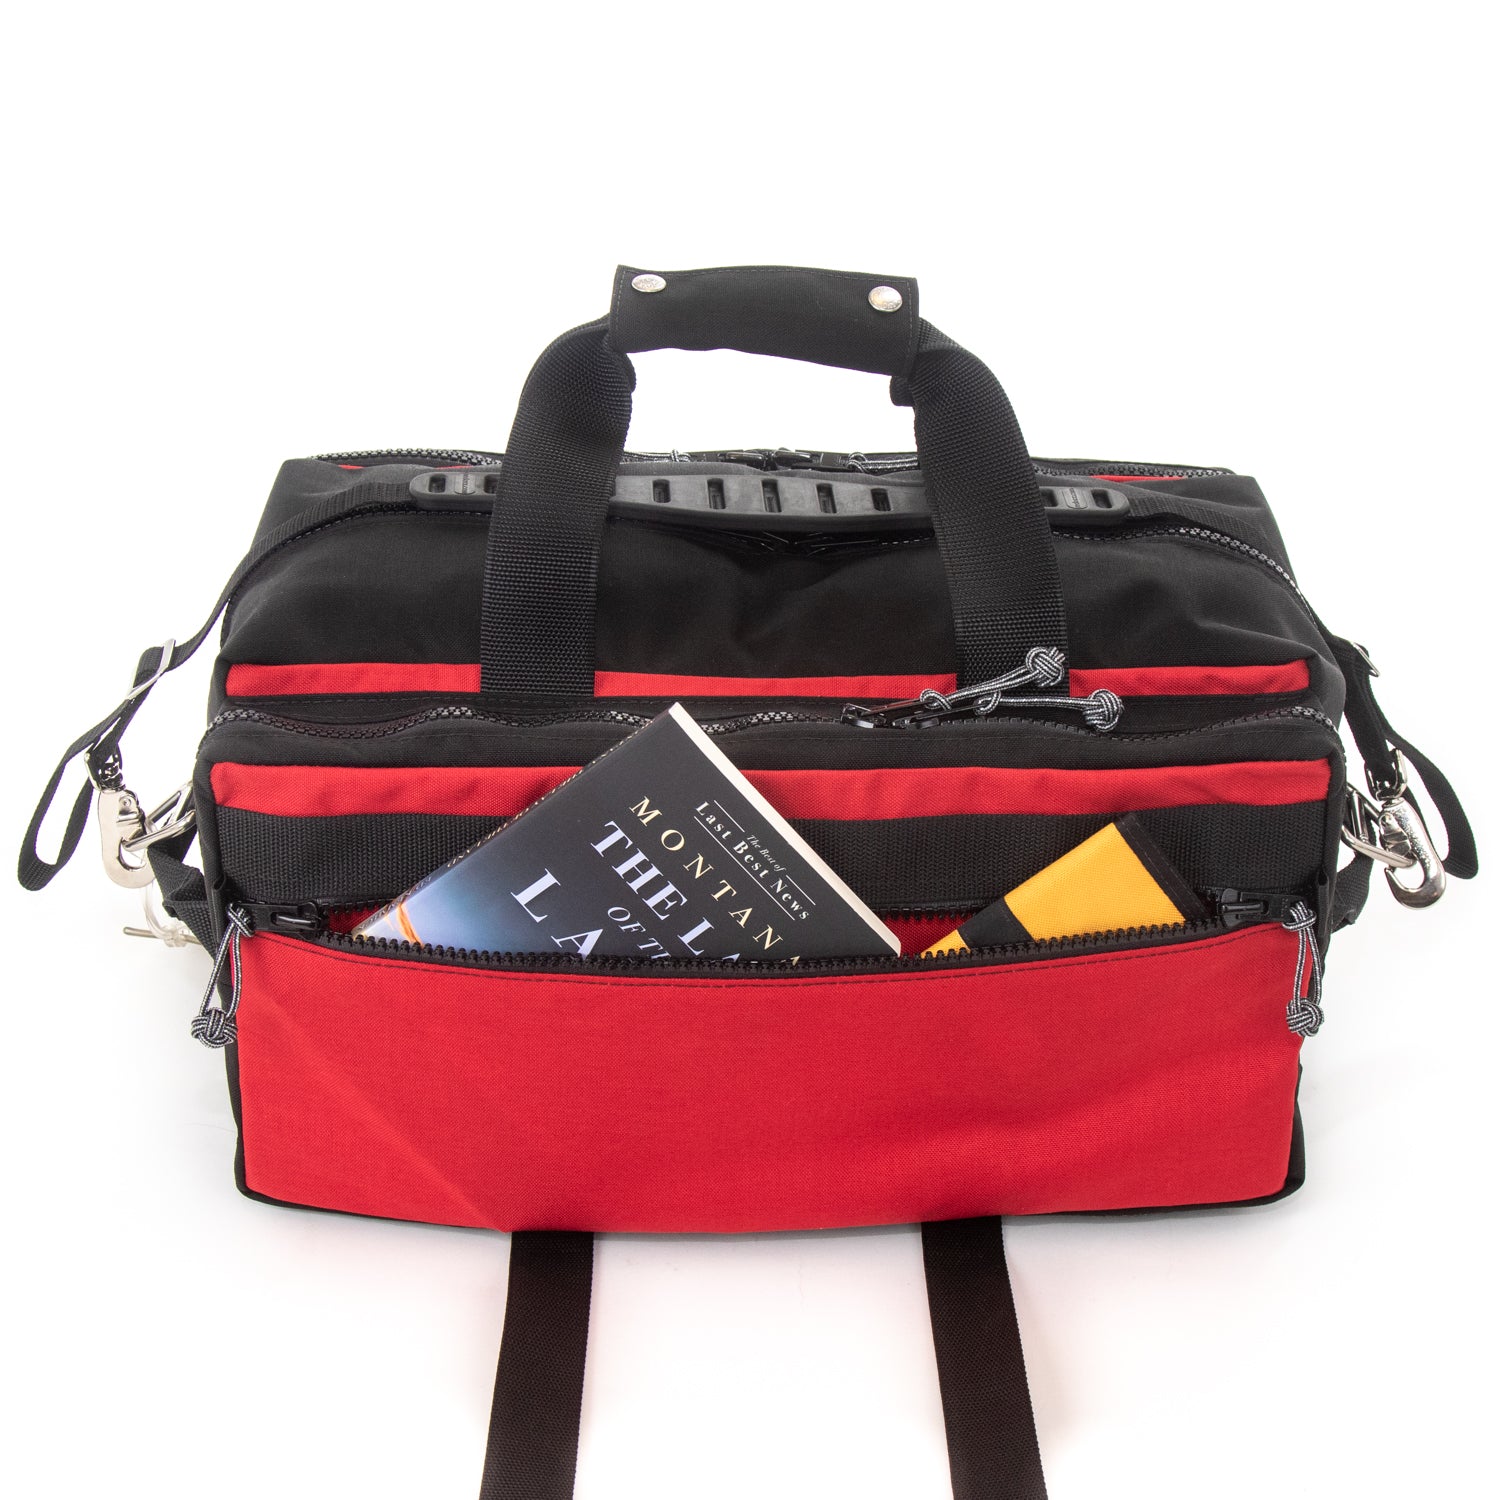 Lil Hombre carry on convertible duffle with book and Red Oxx Rigger Wallet. 